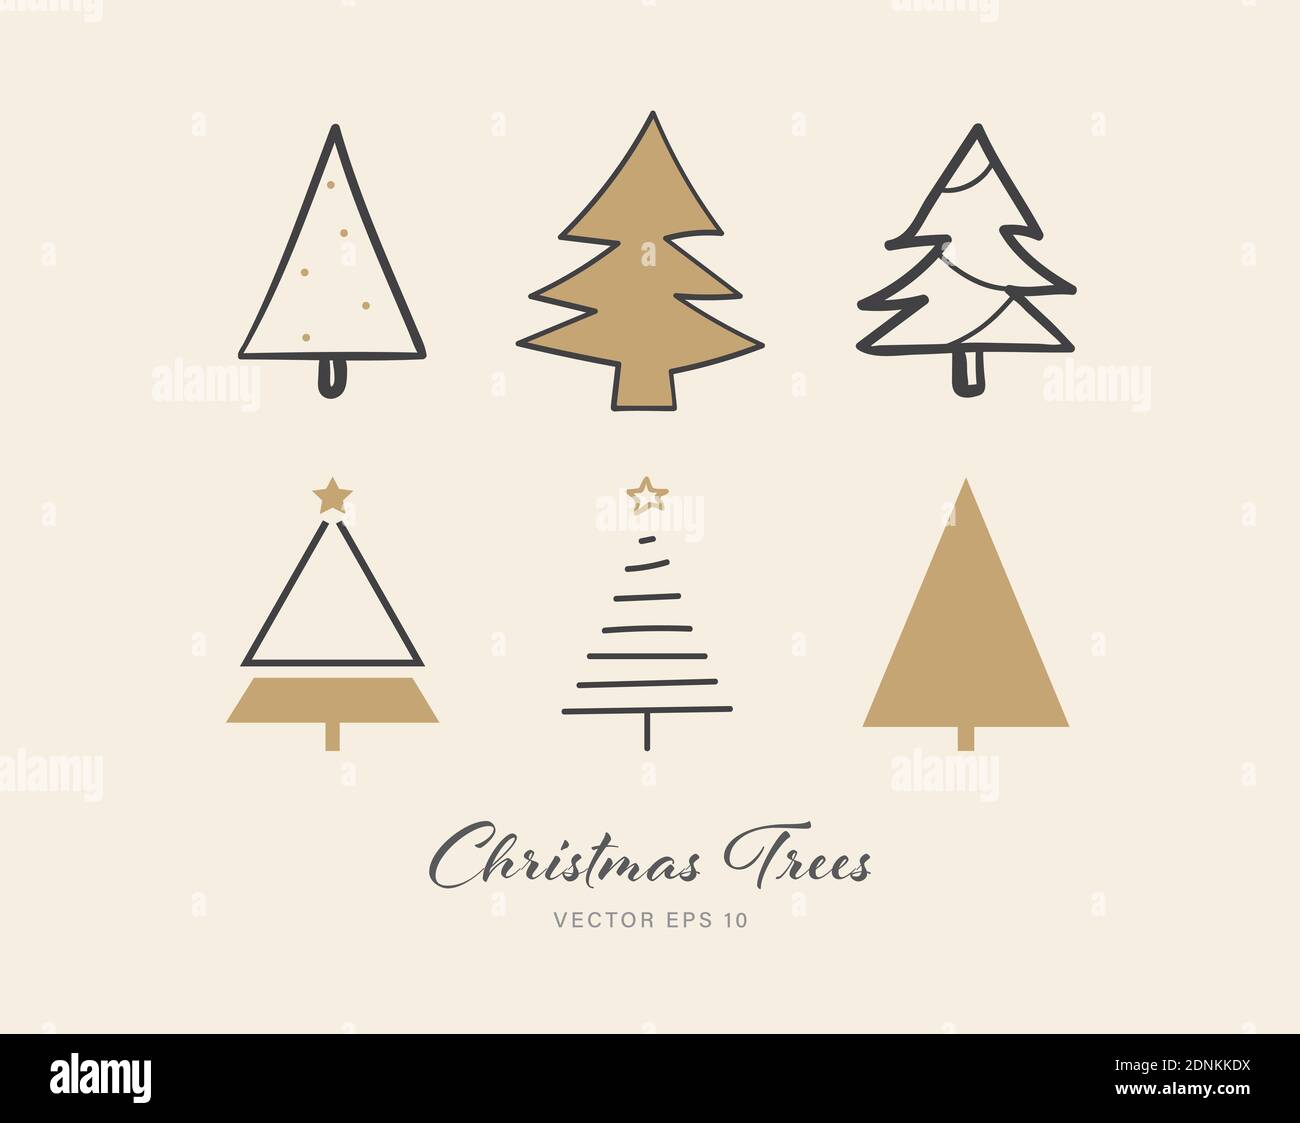 Christmas tree icon set of 6 designs on beige color background Stock Vector